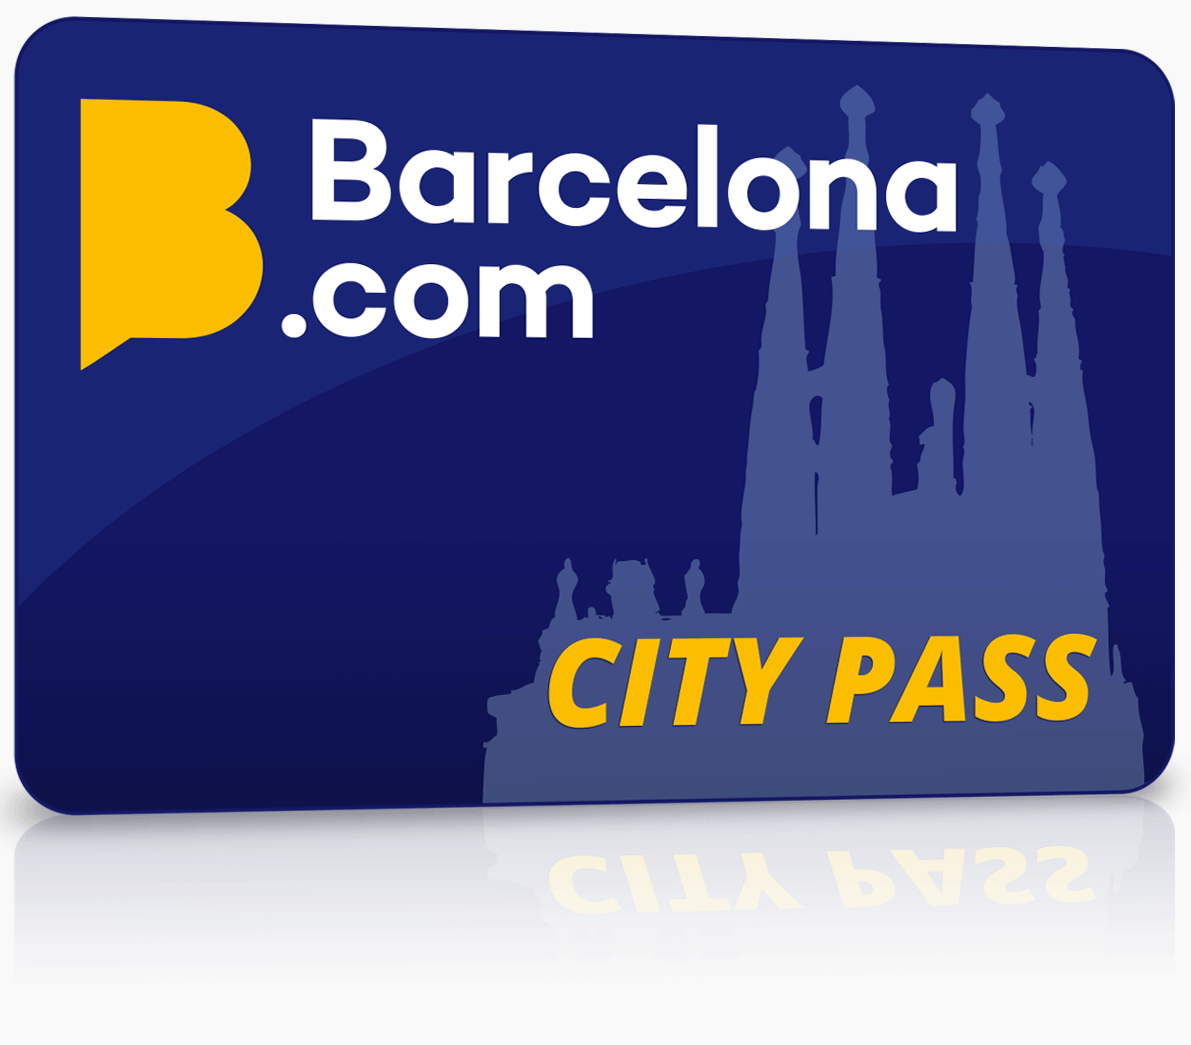 Barcelona City Pass for visitors